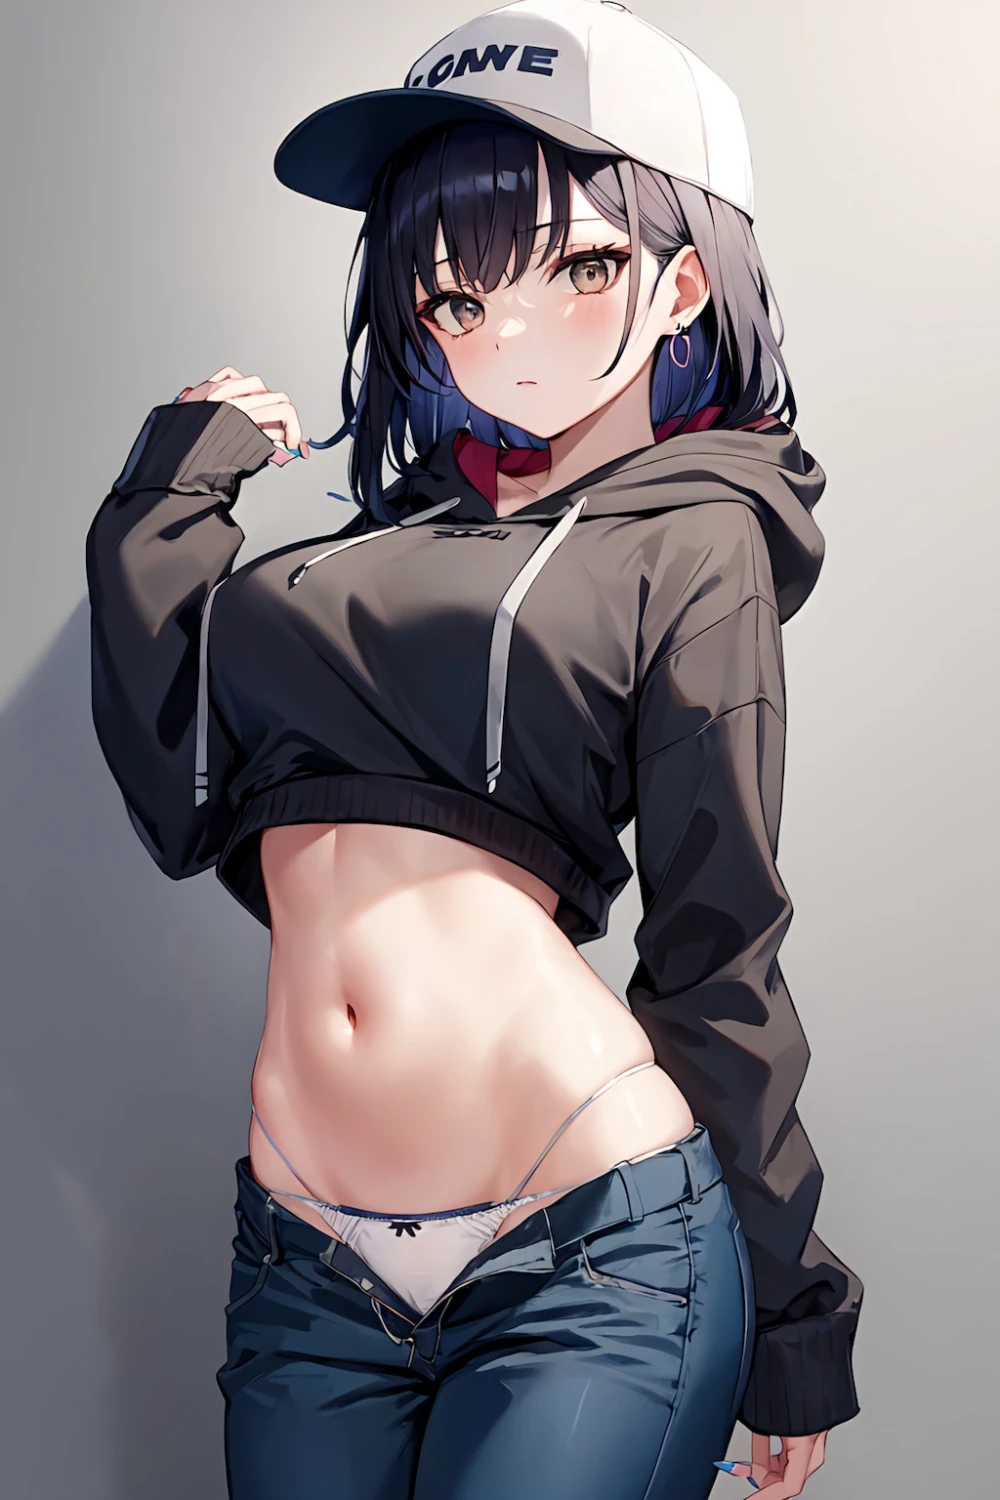 midriff-anime-style-all-ages-6